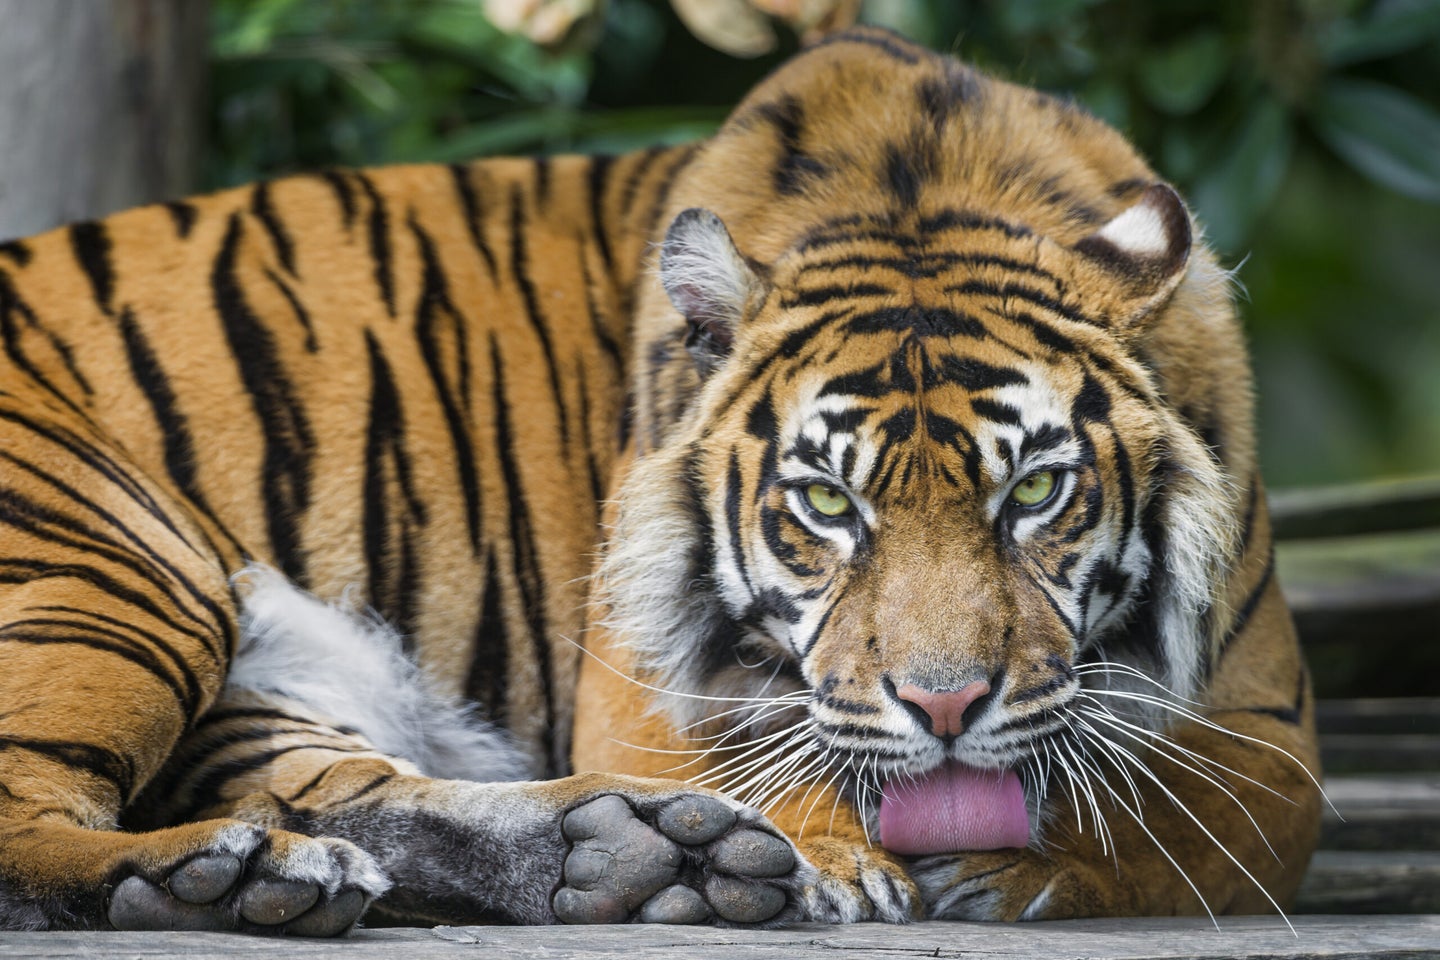 a tigress licking her paws